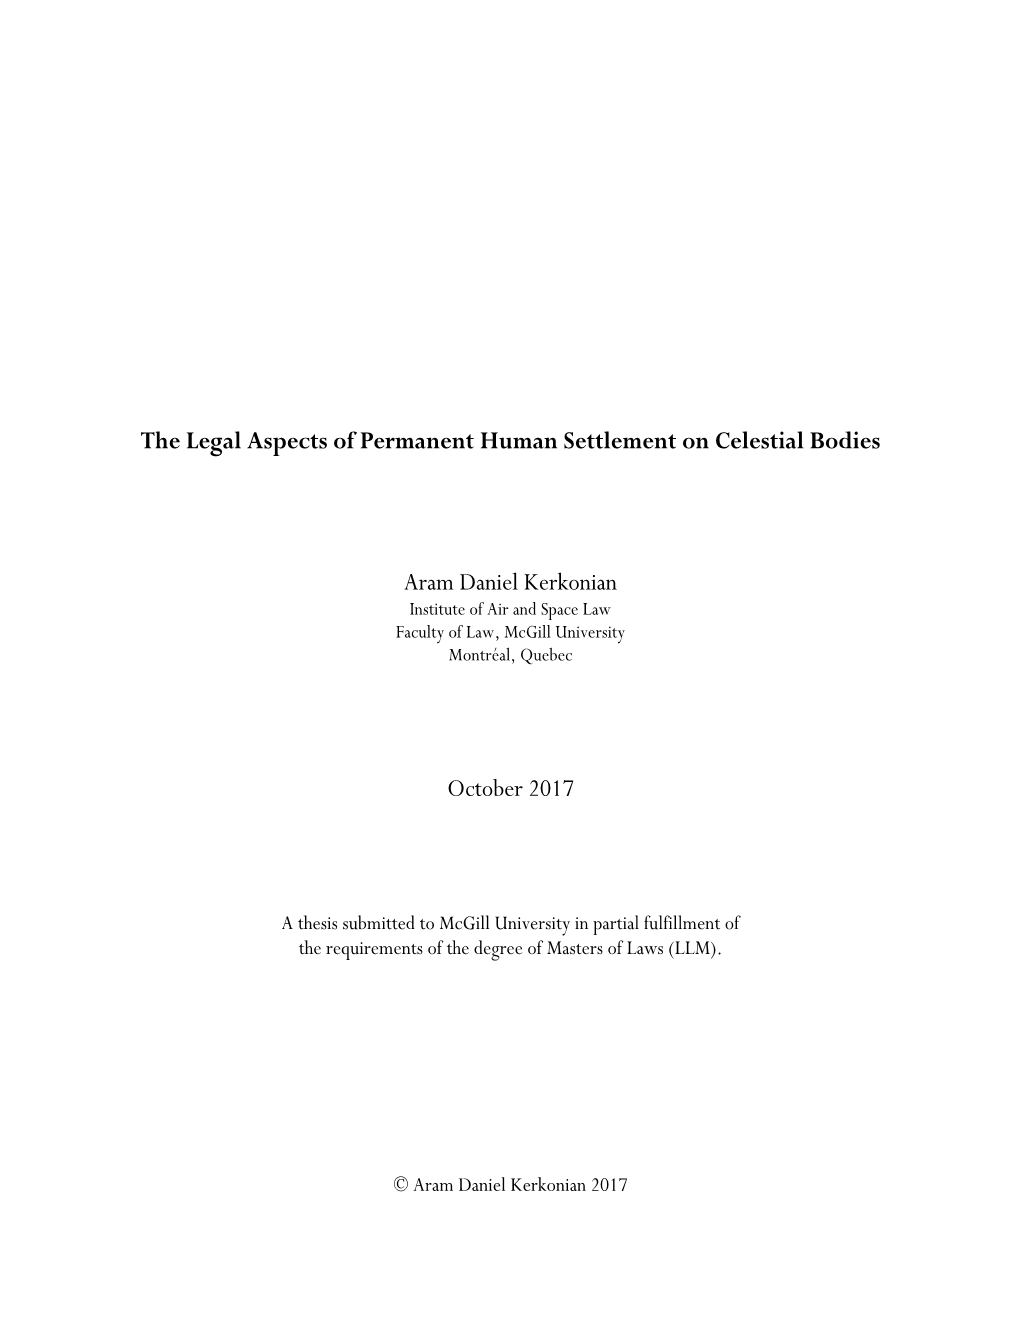 The Legal Aspects of Permanent Human Settlement on Celestial Bodies